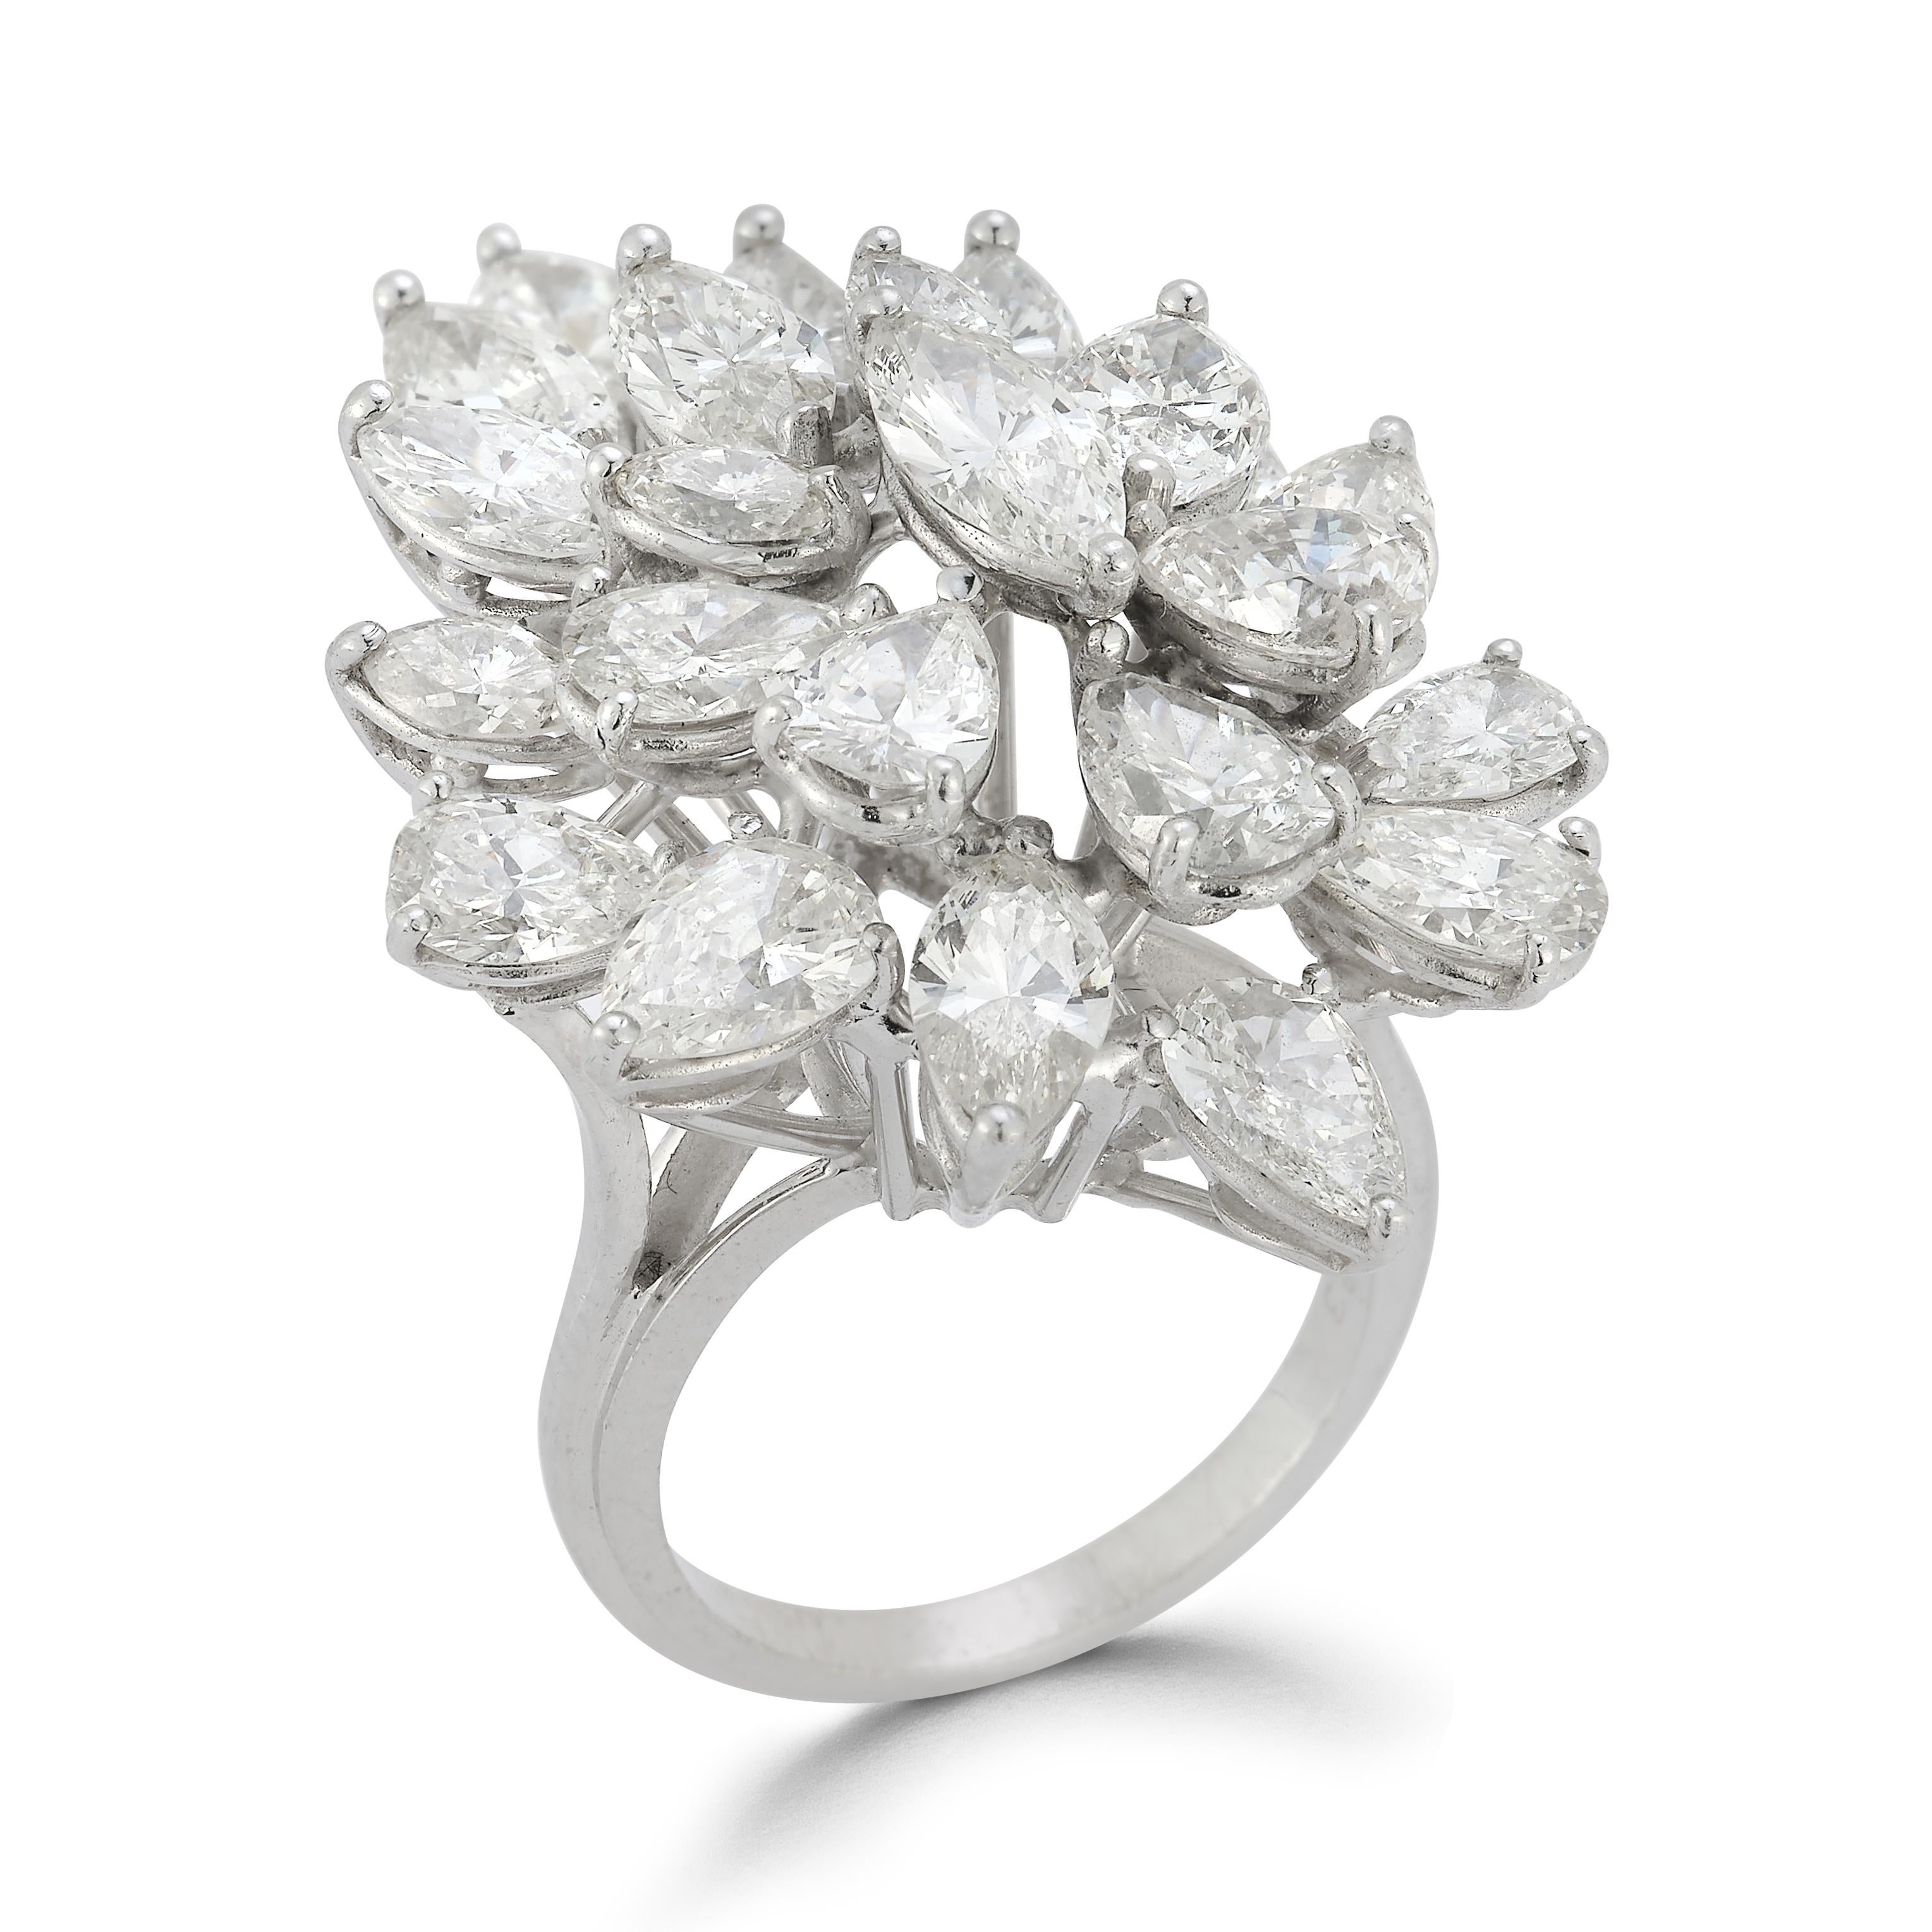 Diamond Cluster Ring White Gold - 23 marquise cut & pear cut diamonds set in white gold

Diamond total approximate weight: 11.4ct

Ring Size: 6
Re-sizable Free Of Charge 